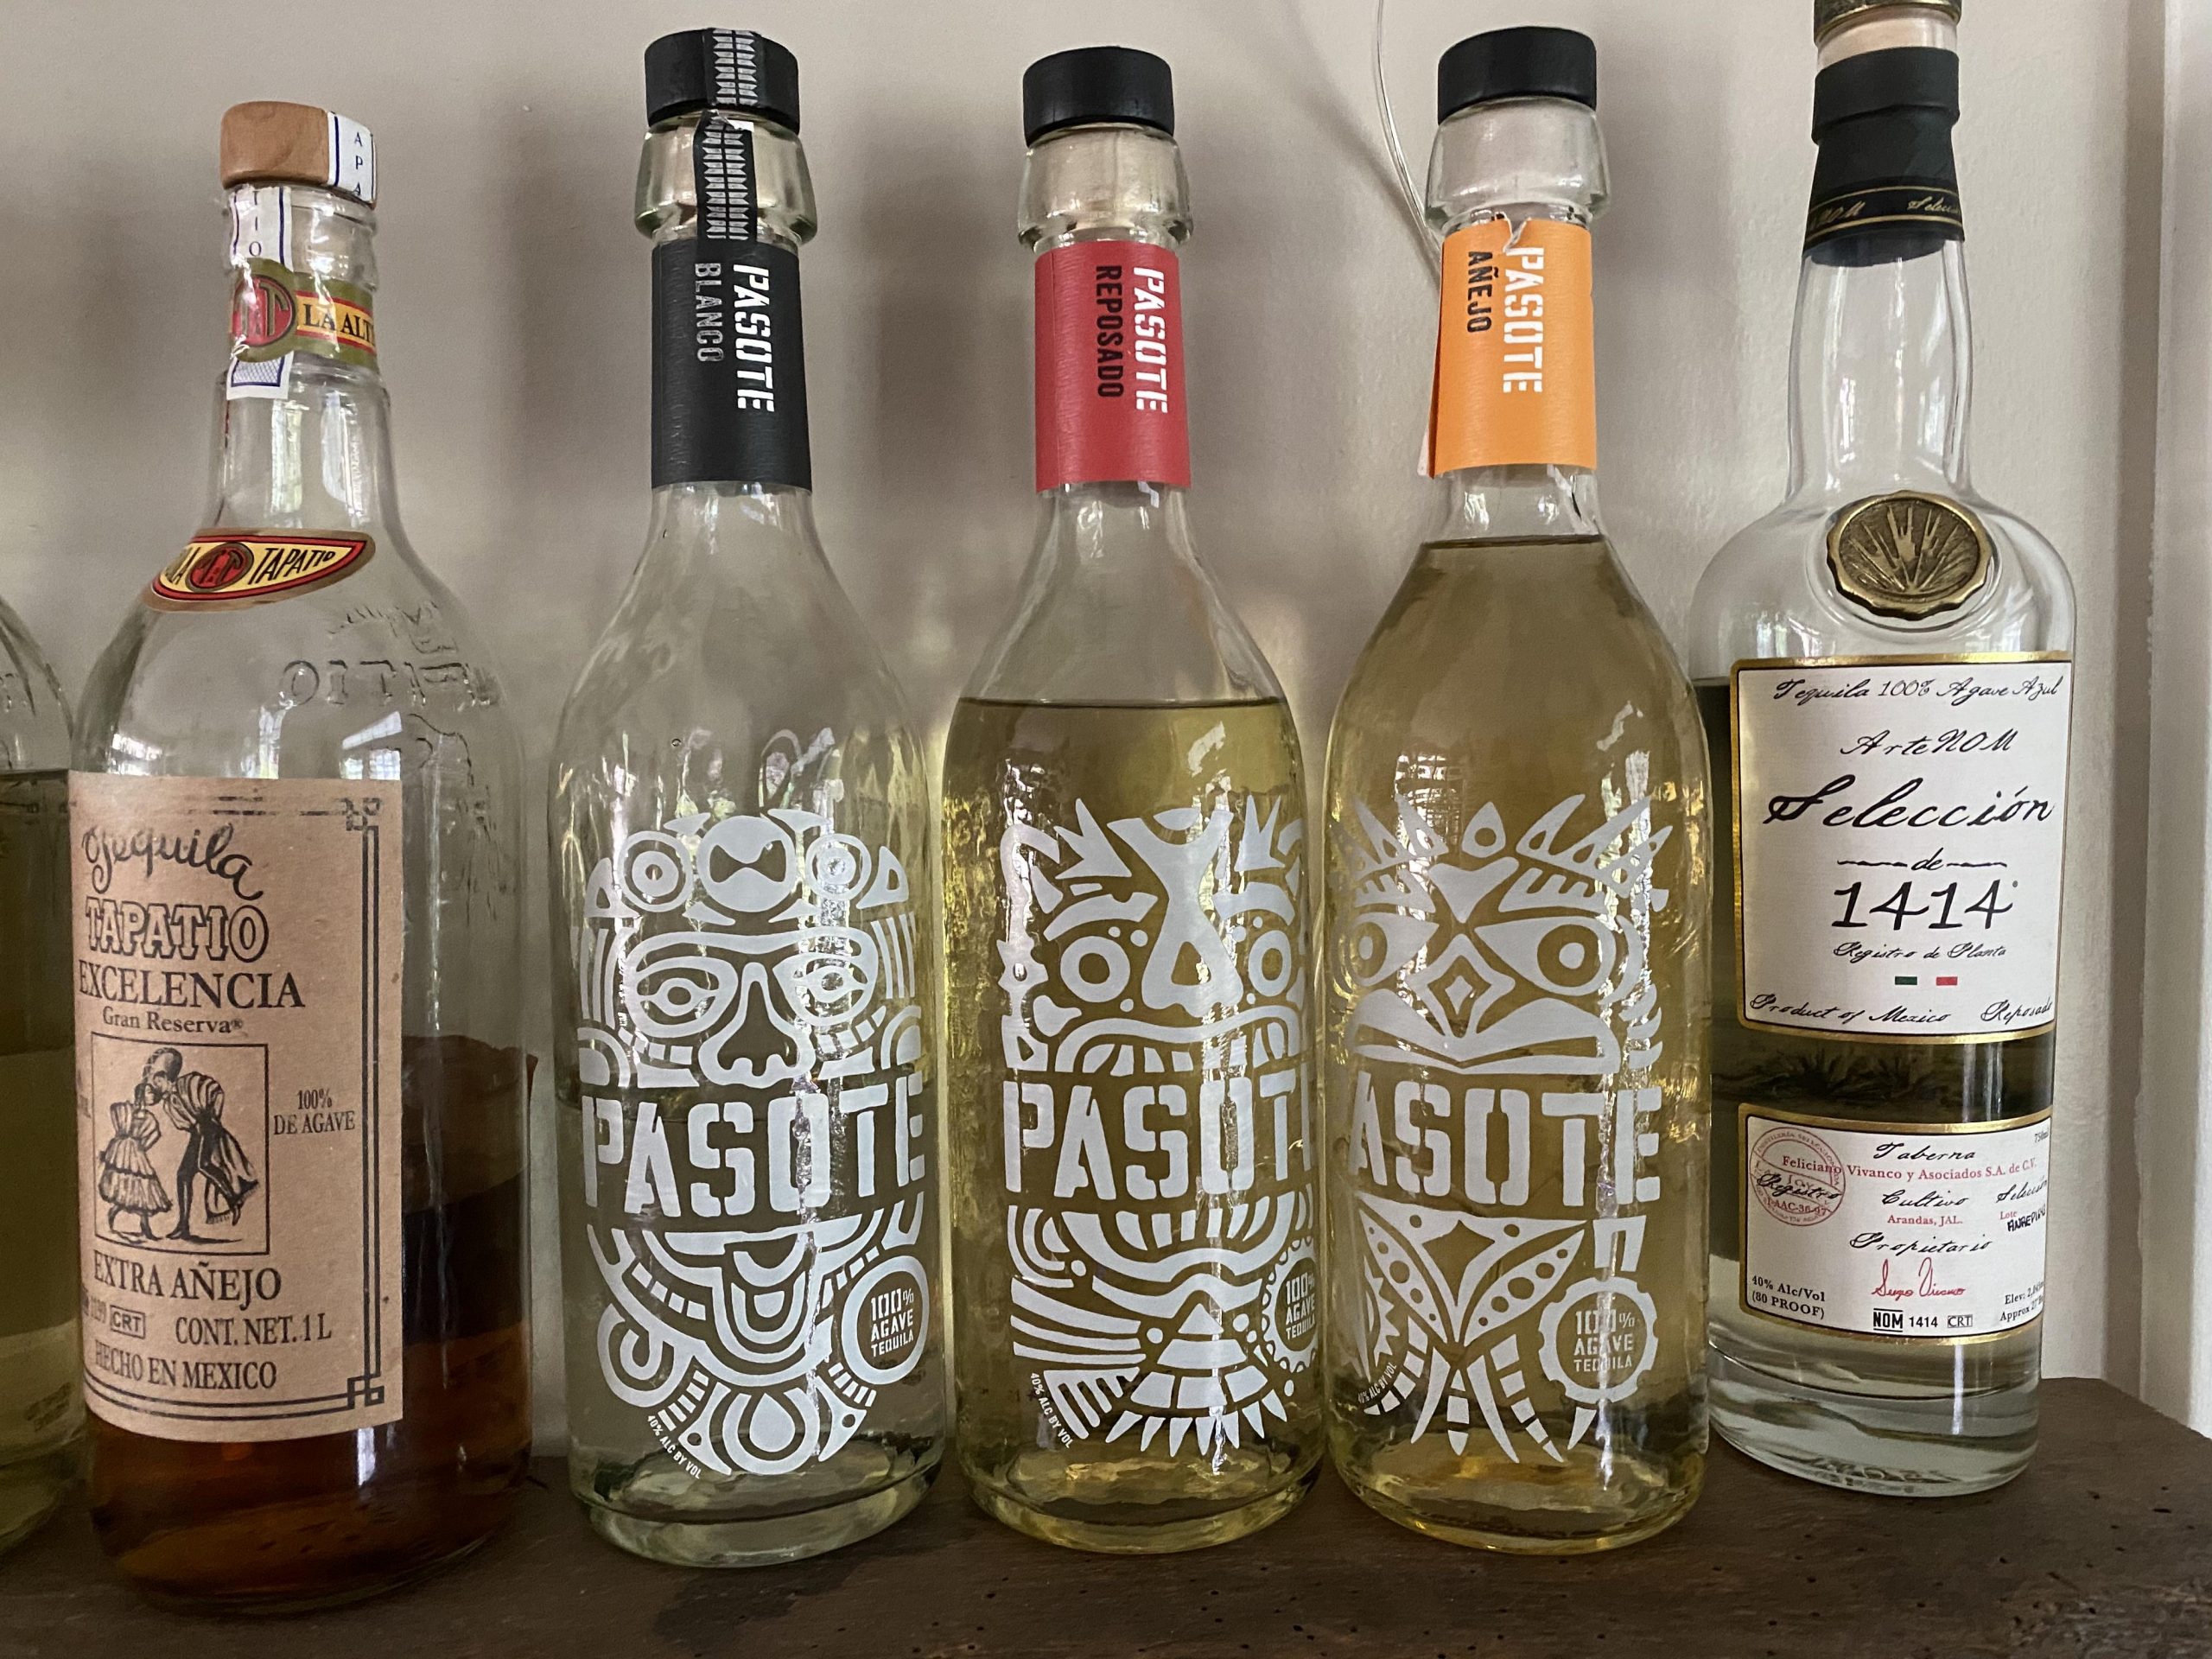 Pasote. Traditionally made. : tequila